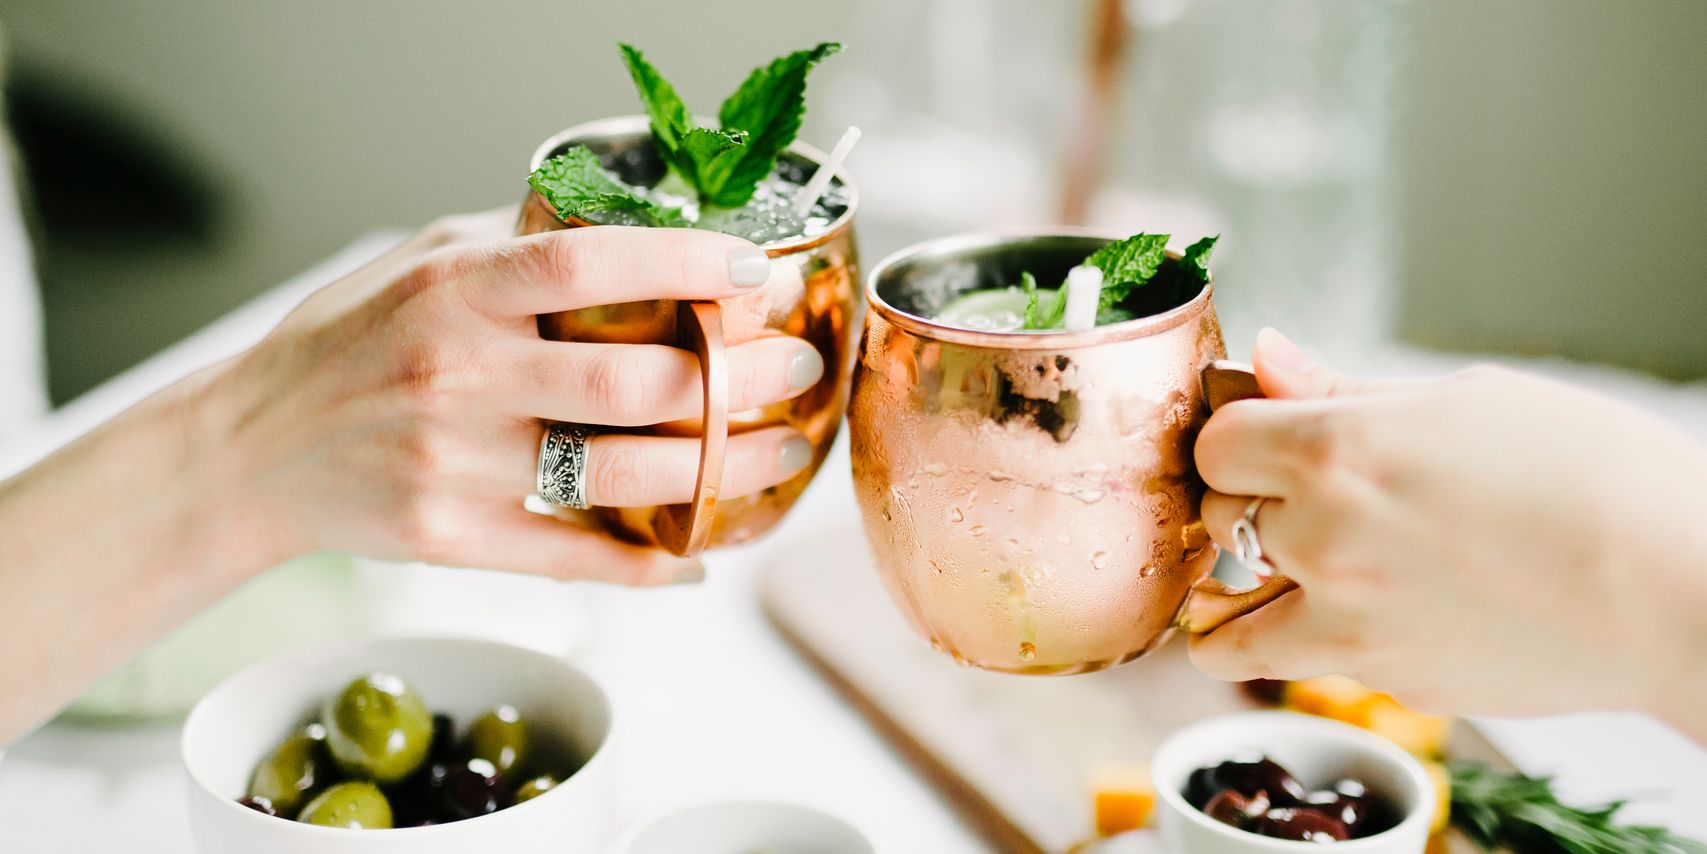 GoodyGoods Moscow Mule Copper Mugs: Make Any Drink Taste Much Better 100% Pure Solid Copper His & Hers Gift Set- 2 Hammered 18 OZ Copper Cups 2 Unique Straws Copper, 18oz Jigger & Recipe Booklet! 